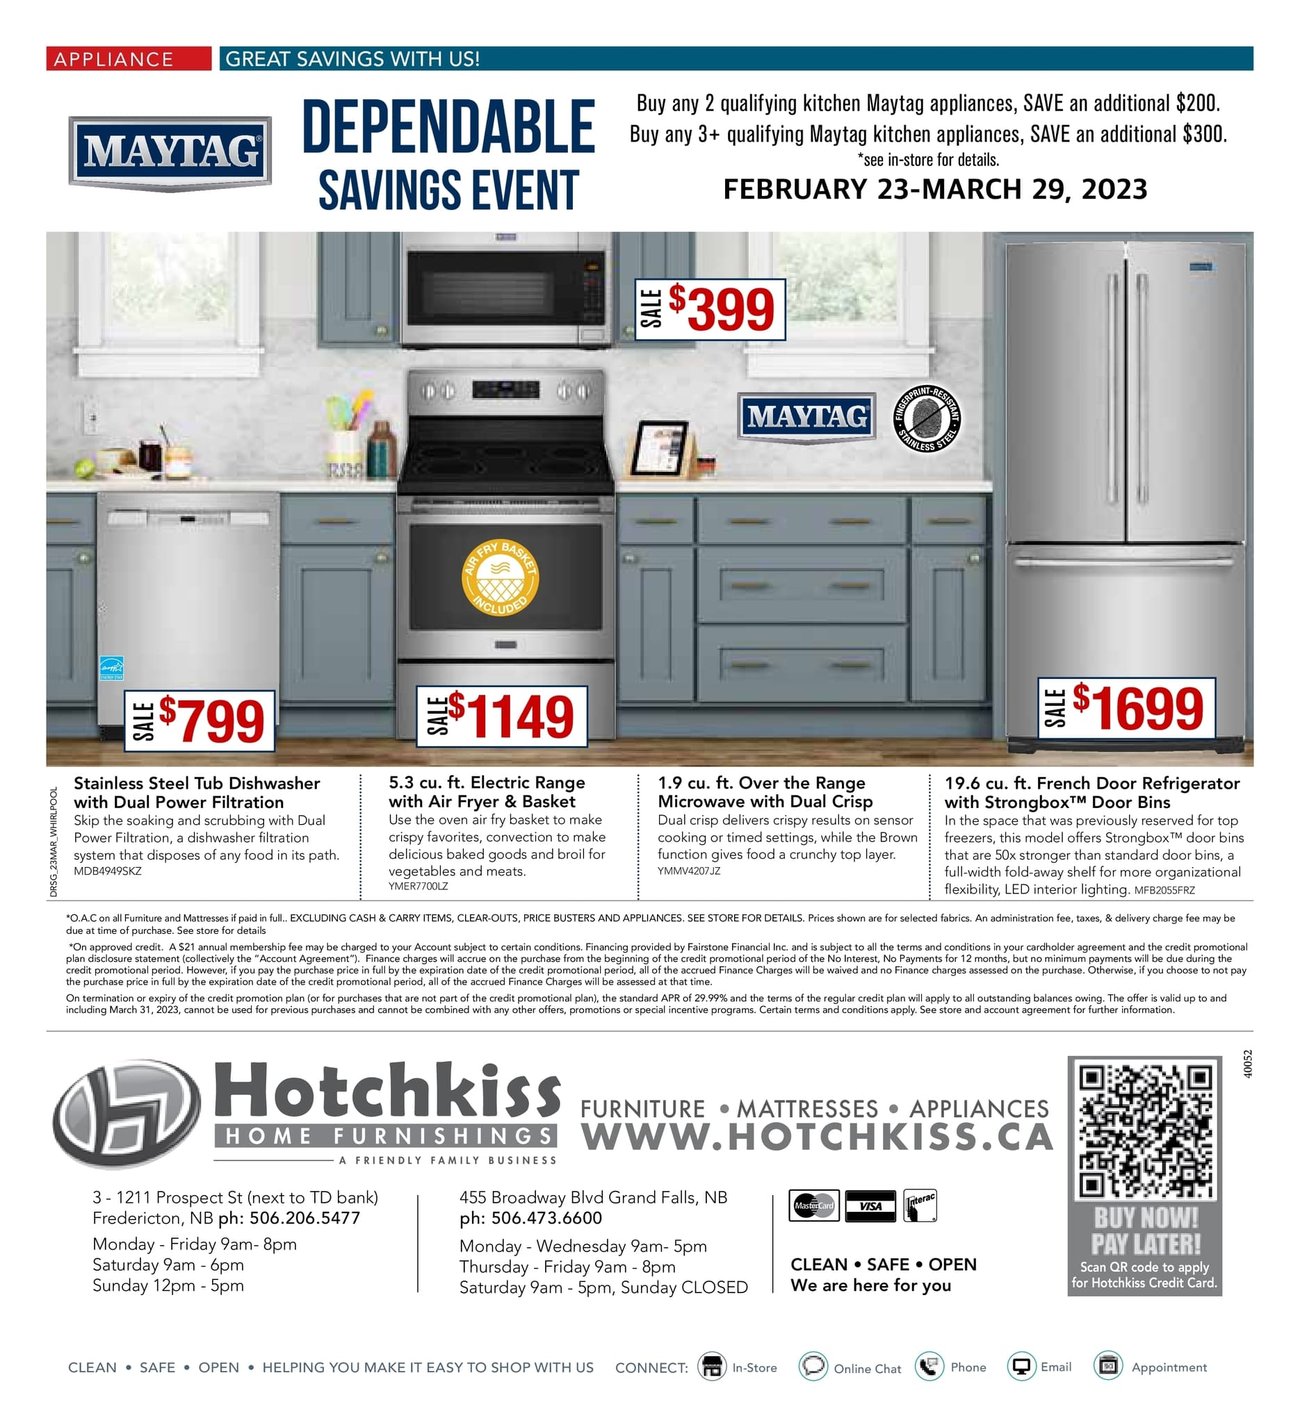 Hotchkiss Home Furnishings - Monthly Savings - Page 8